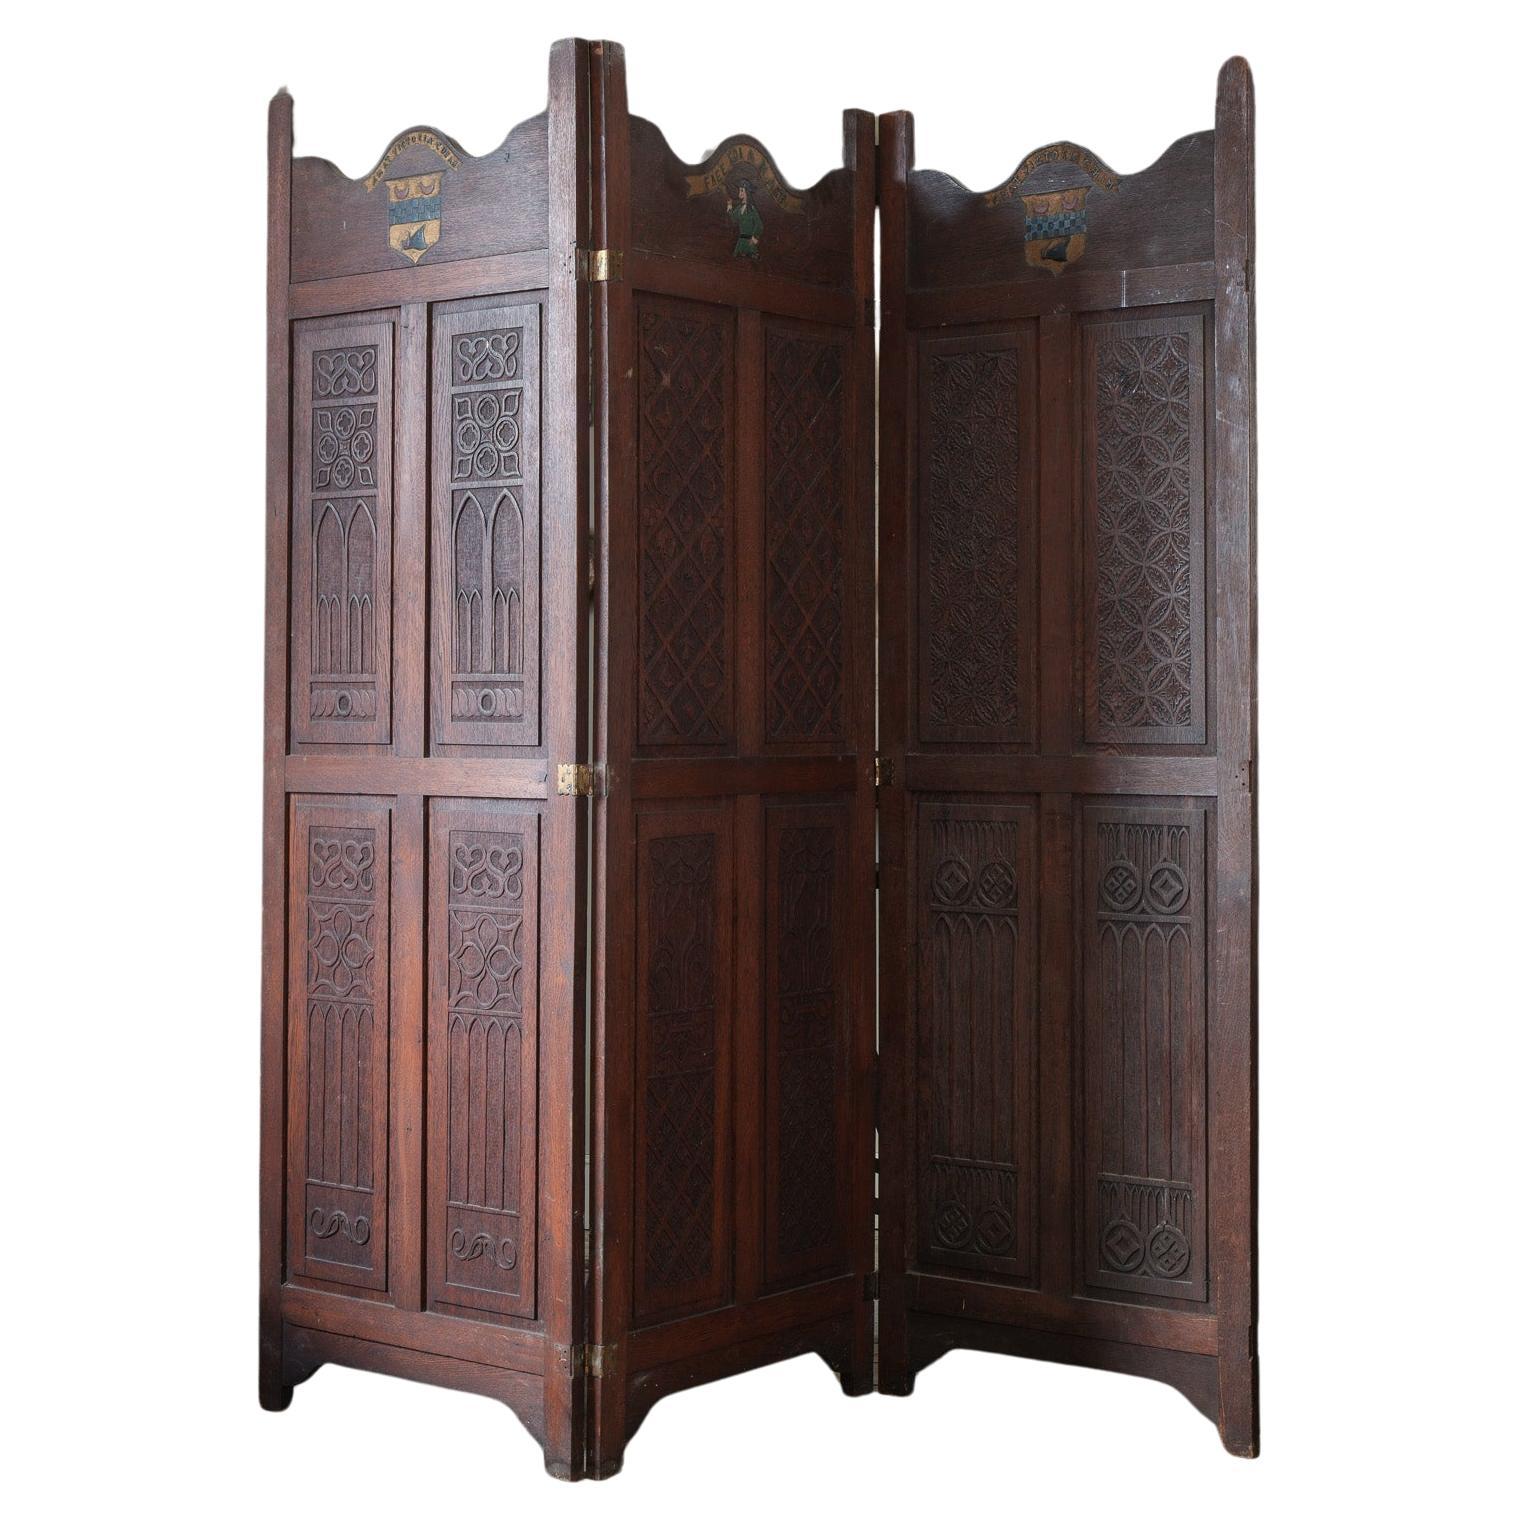 A Three Fold Carved Mahogany Room Screen For Sale